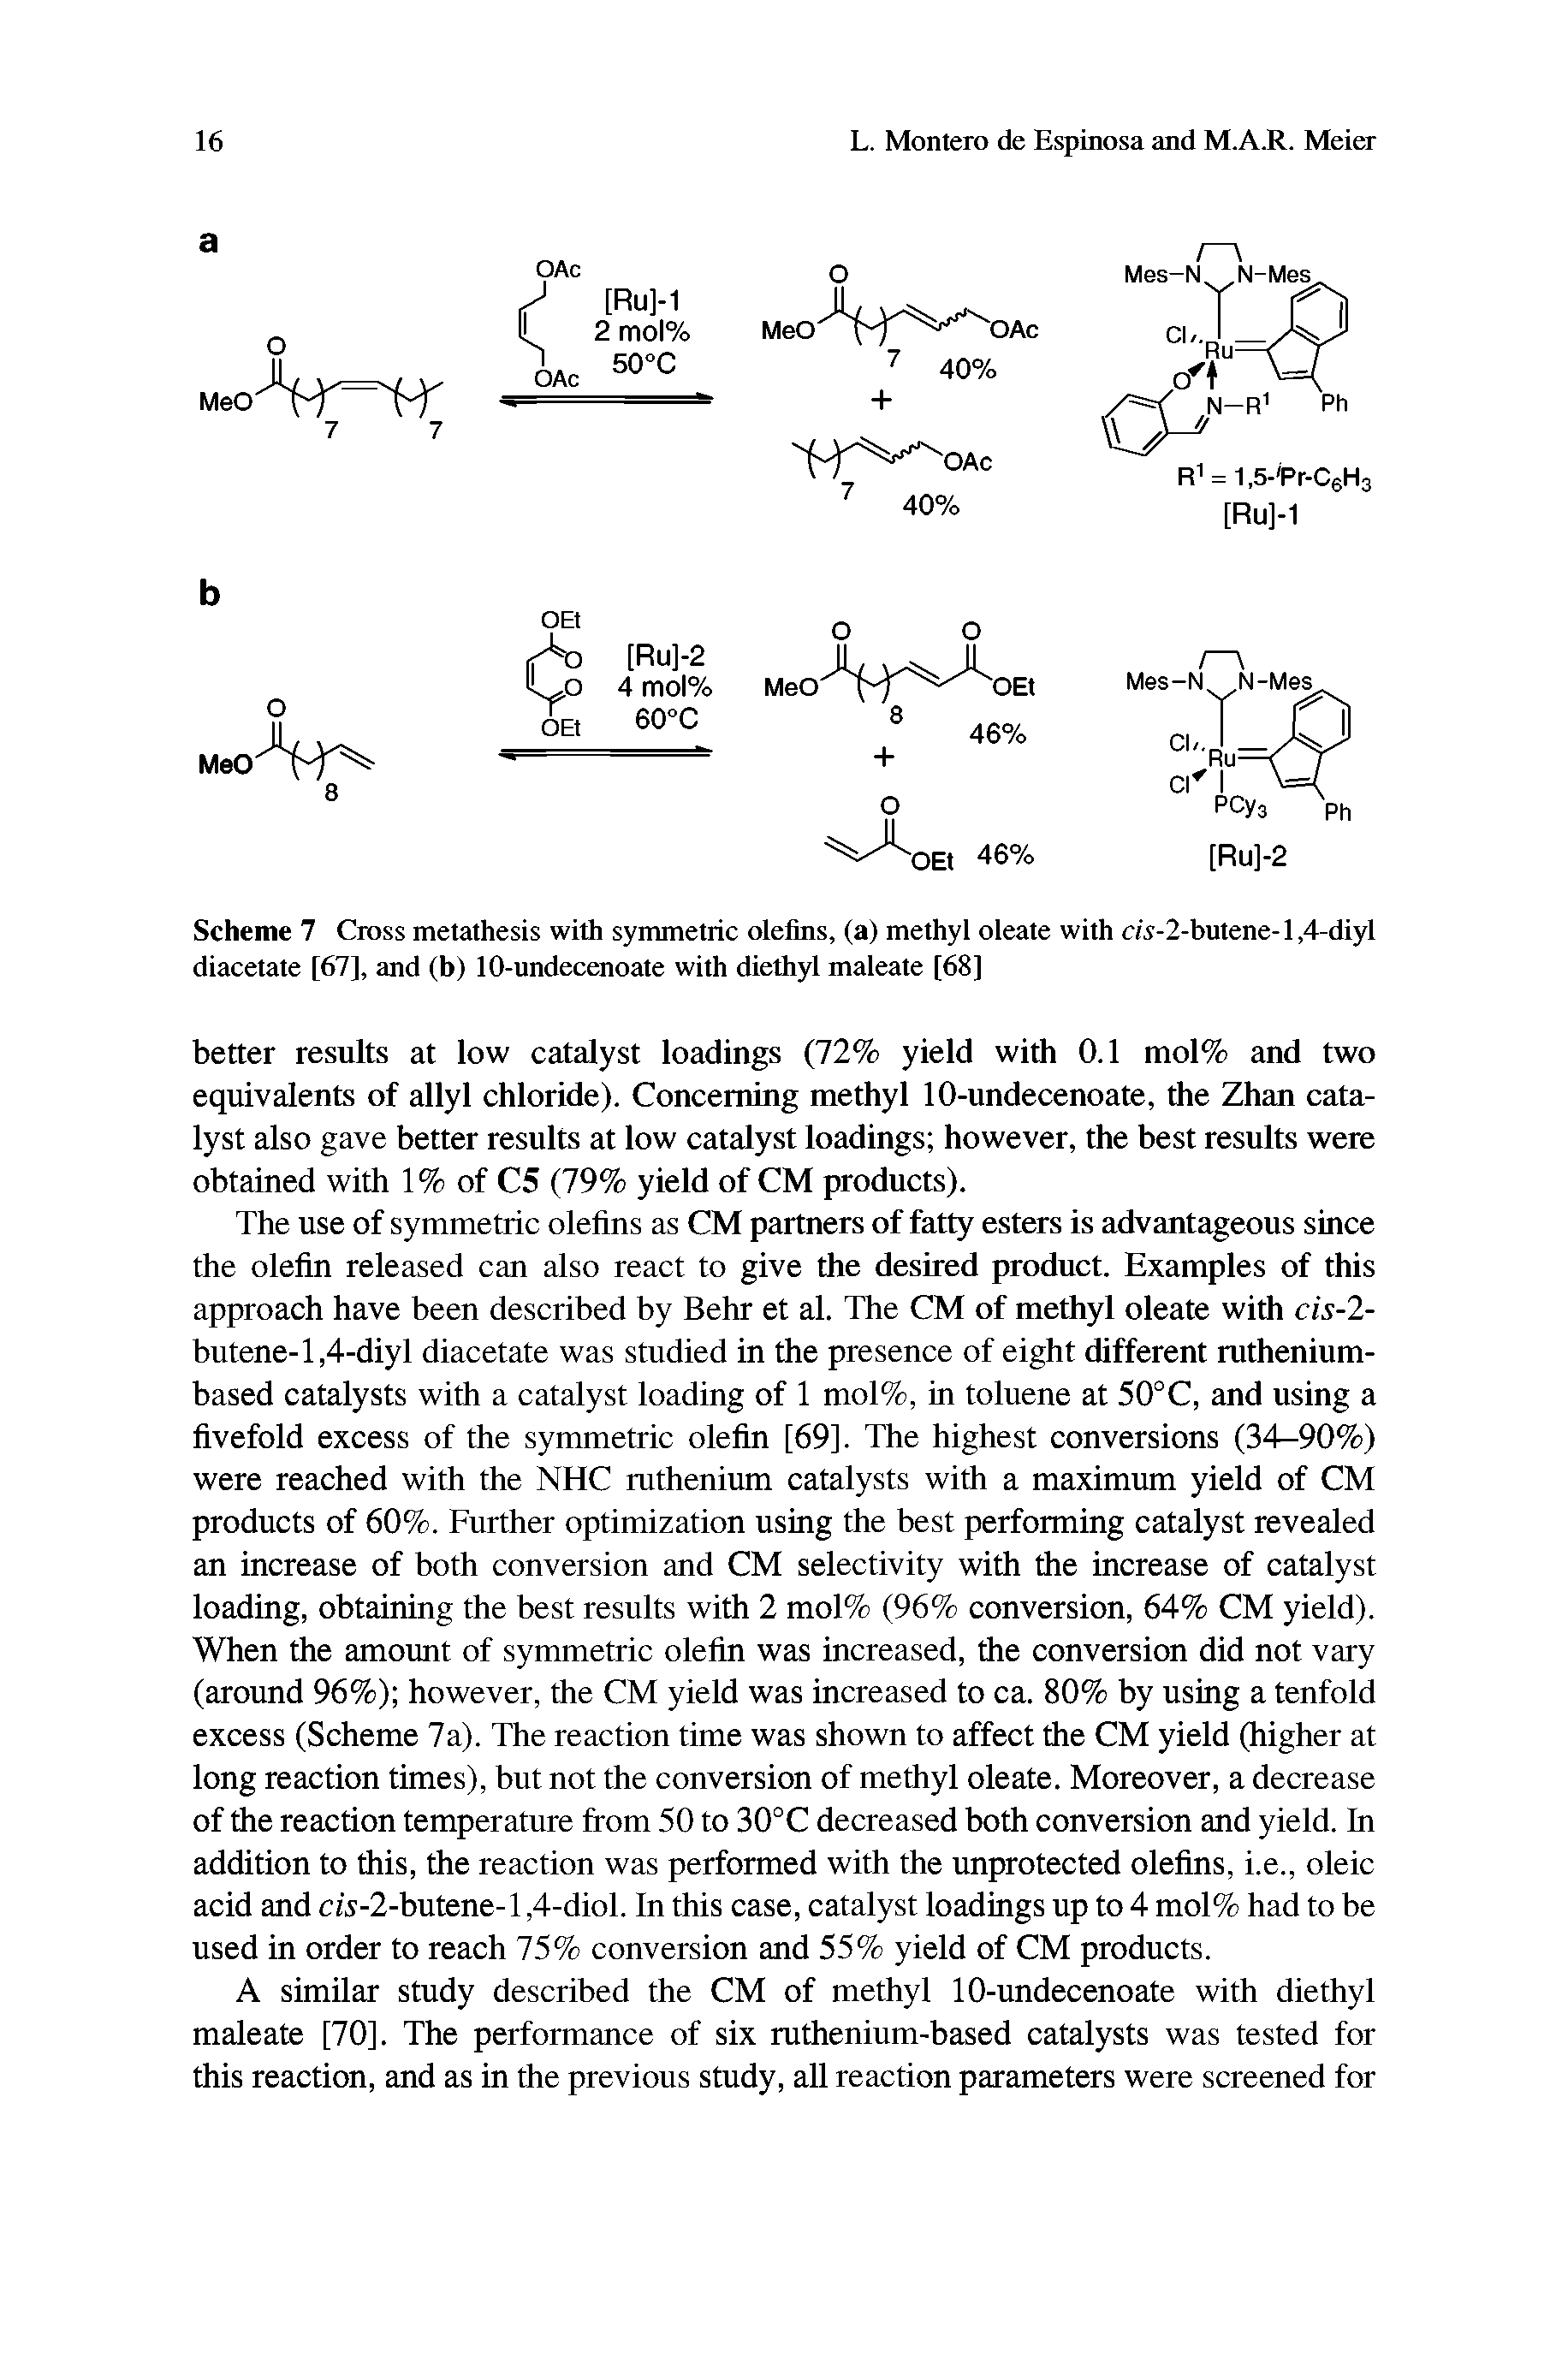 Scheme 7 Cross metathesis with symmetric olefins, (a) methyl oleate with m-2-butene-1,4-d iyl diacetate [67], and (b) 10-undecenoate with diethyl maleate [68]...